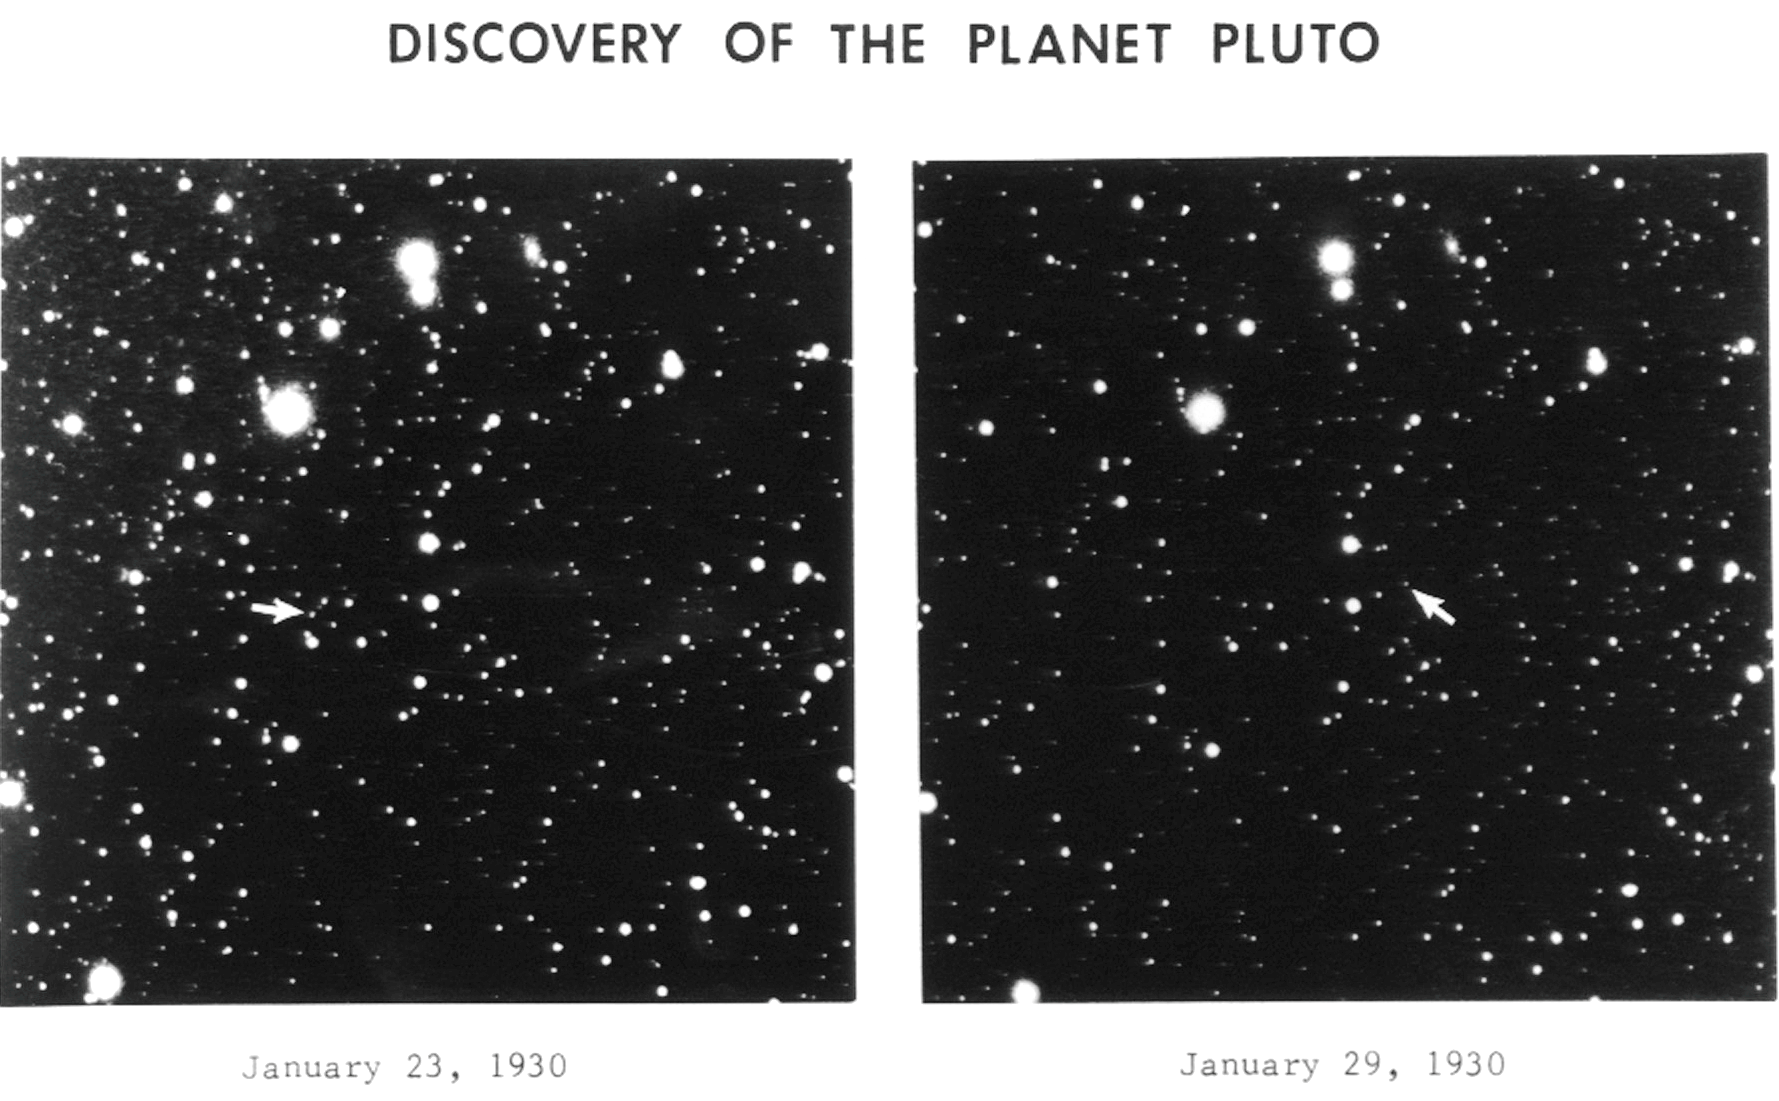 https://en.wikipedia.org/wiki/File:Pluto_discovery_plates.png